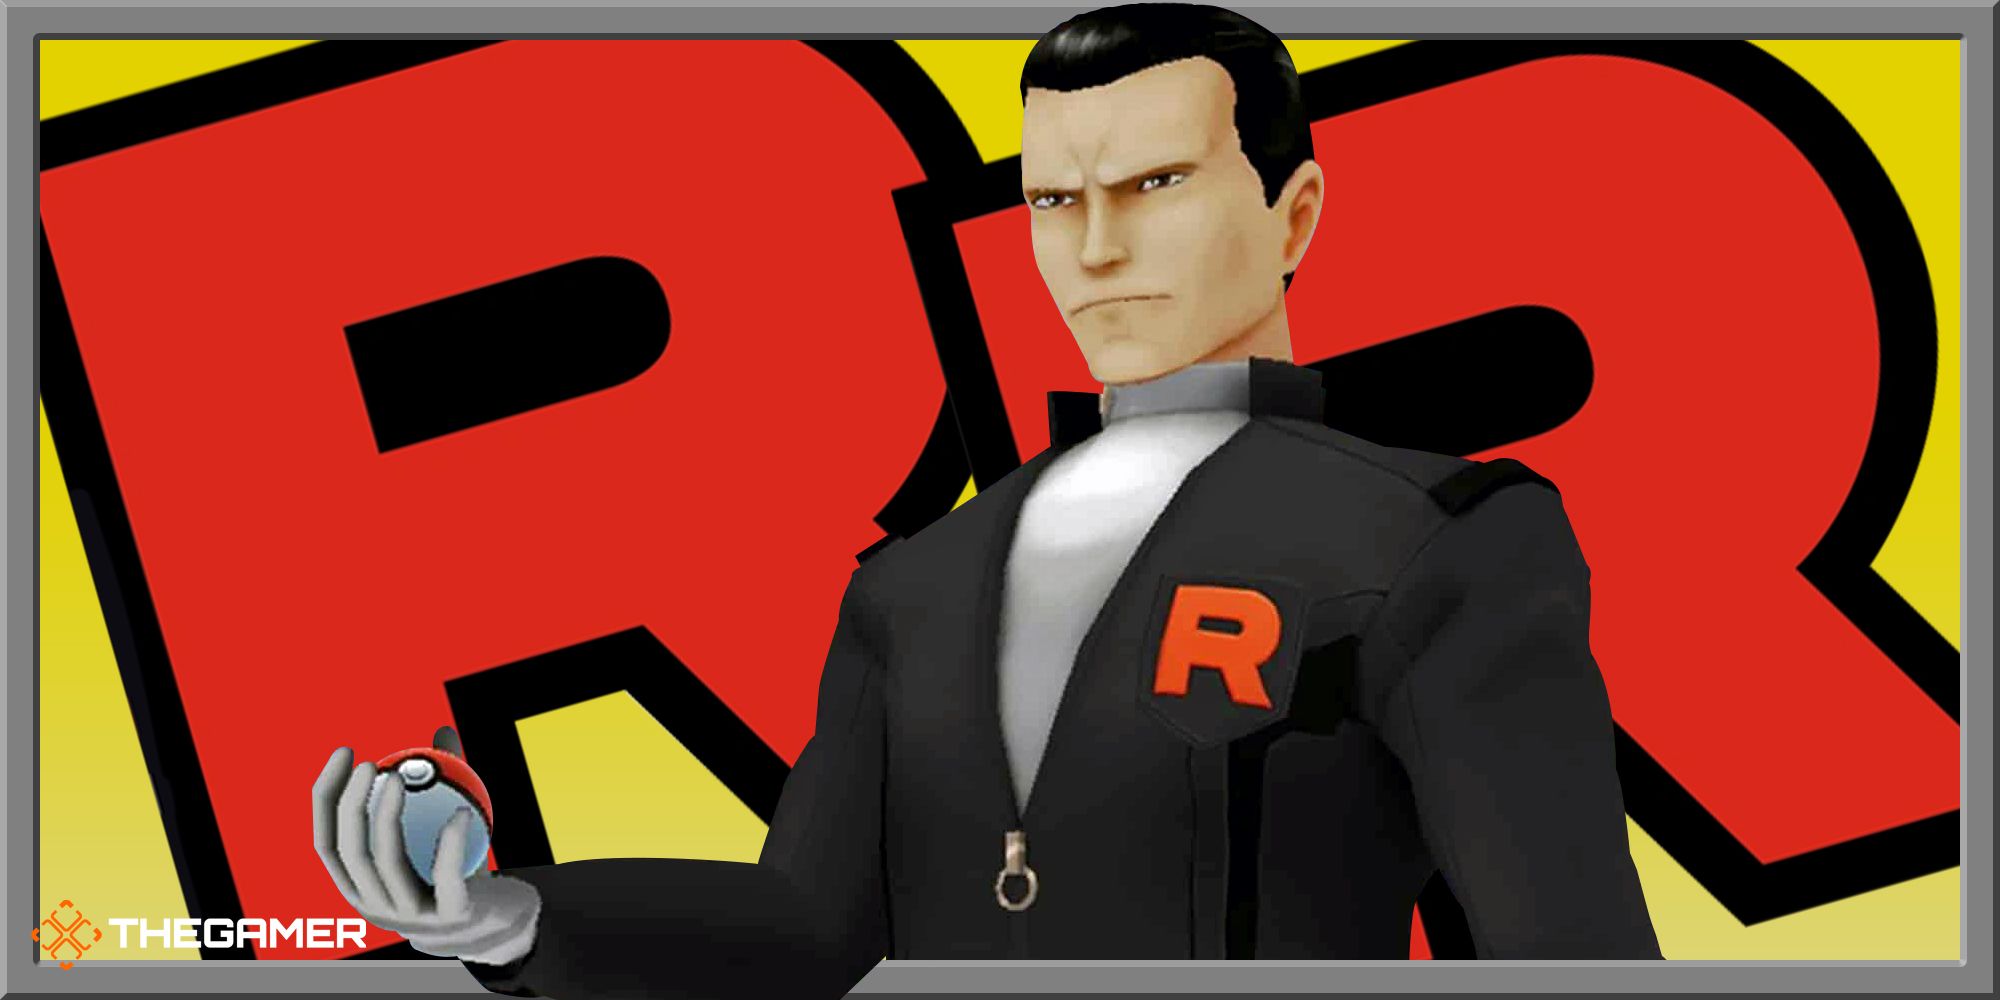 Game image of Giovanni with RR background.